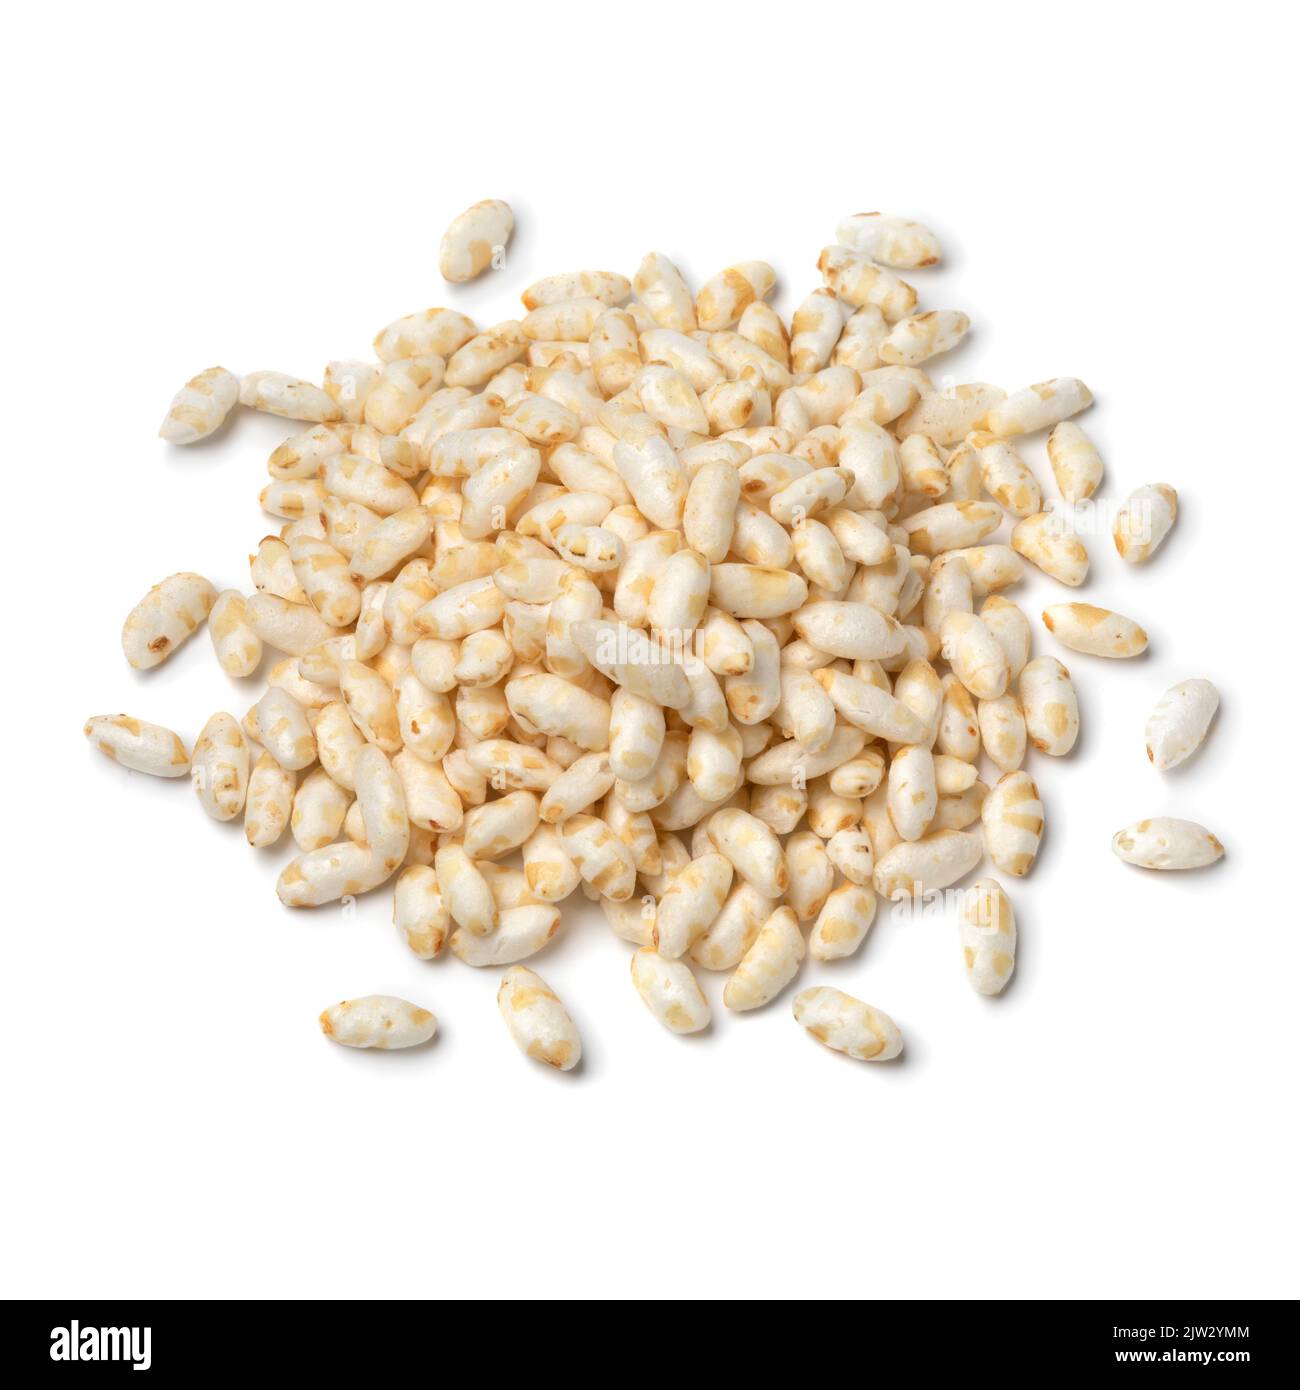 Heap of puffed rice close up isolated on white background Stock Photo